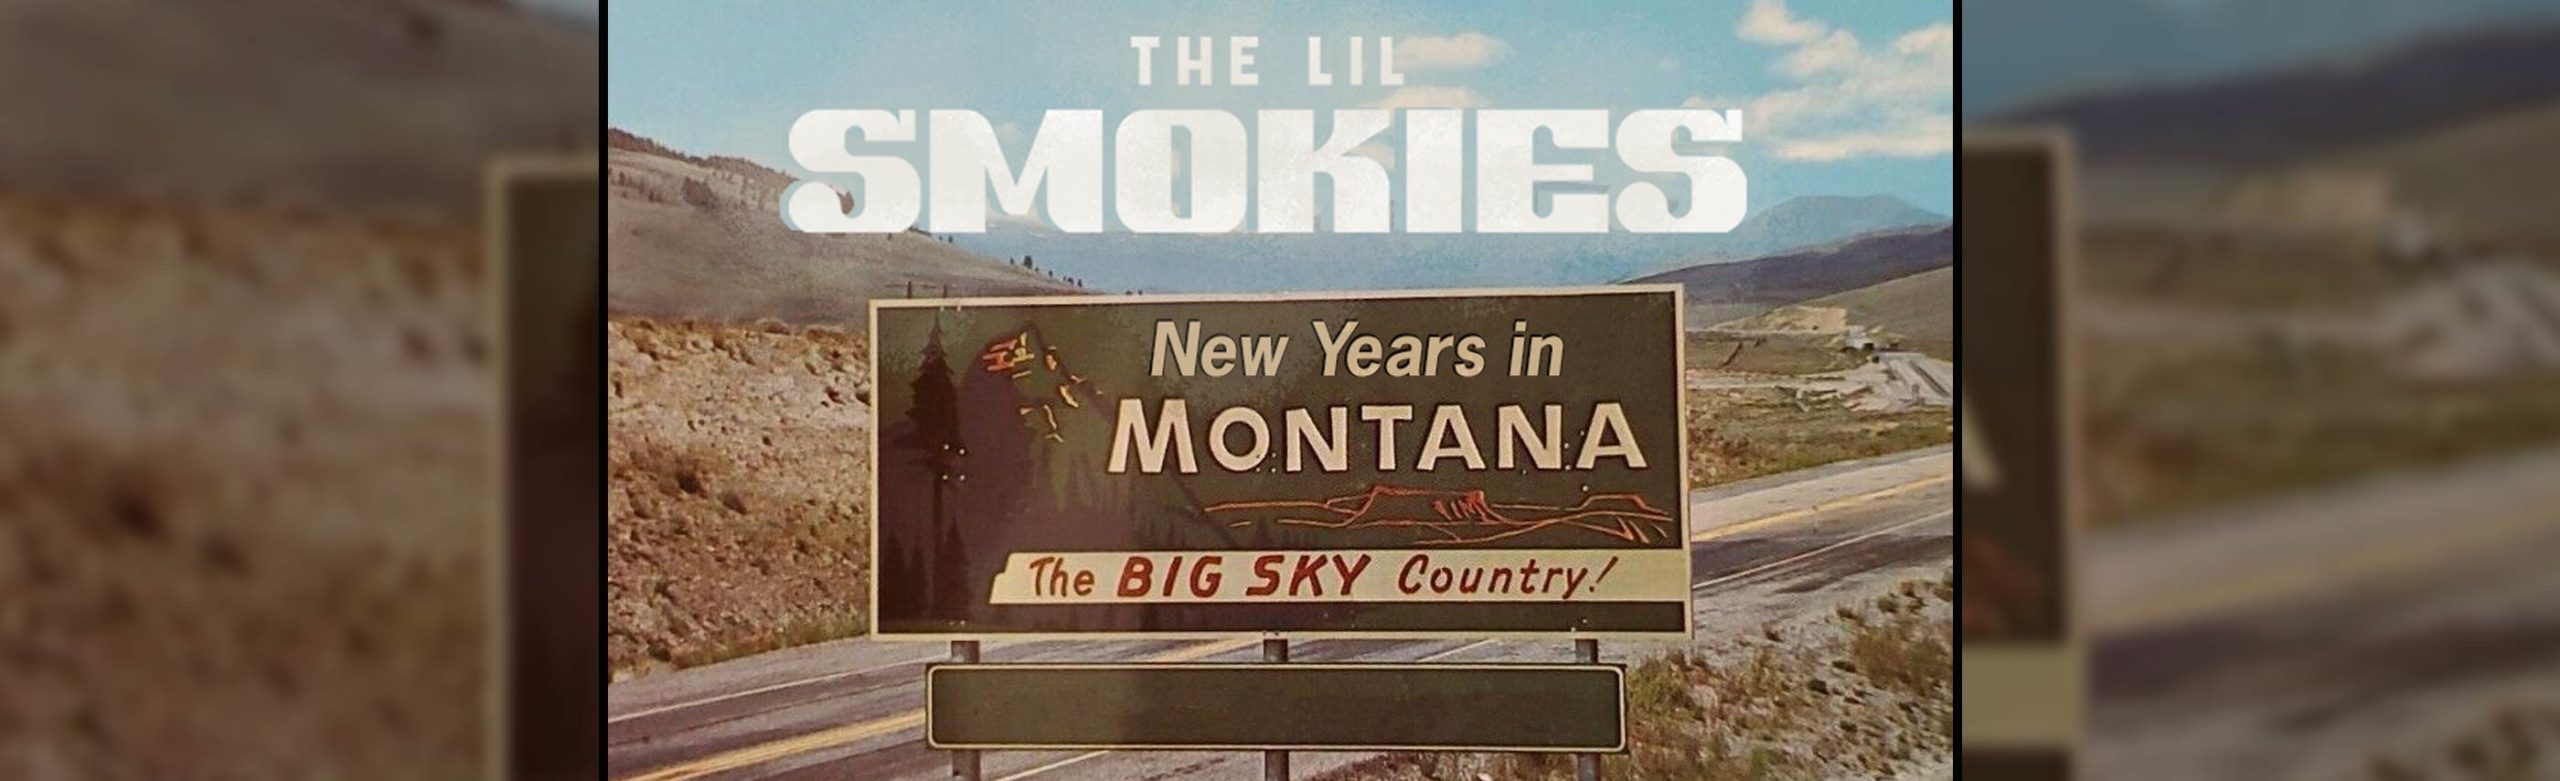 The Lil Smokies Announce New Year’s Run in Montana Image